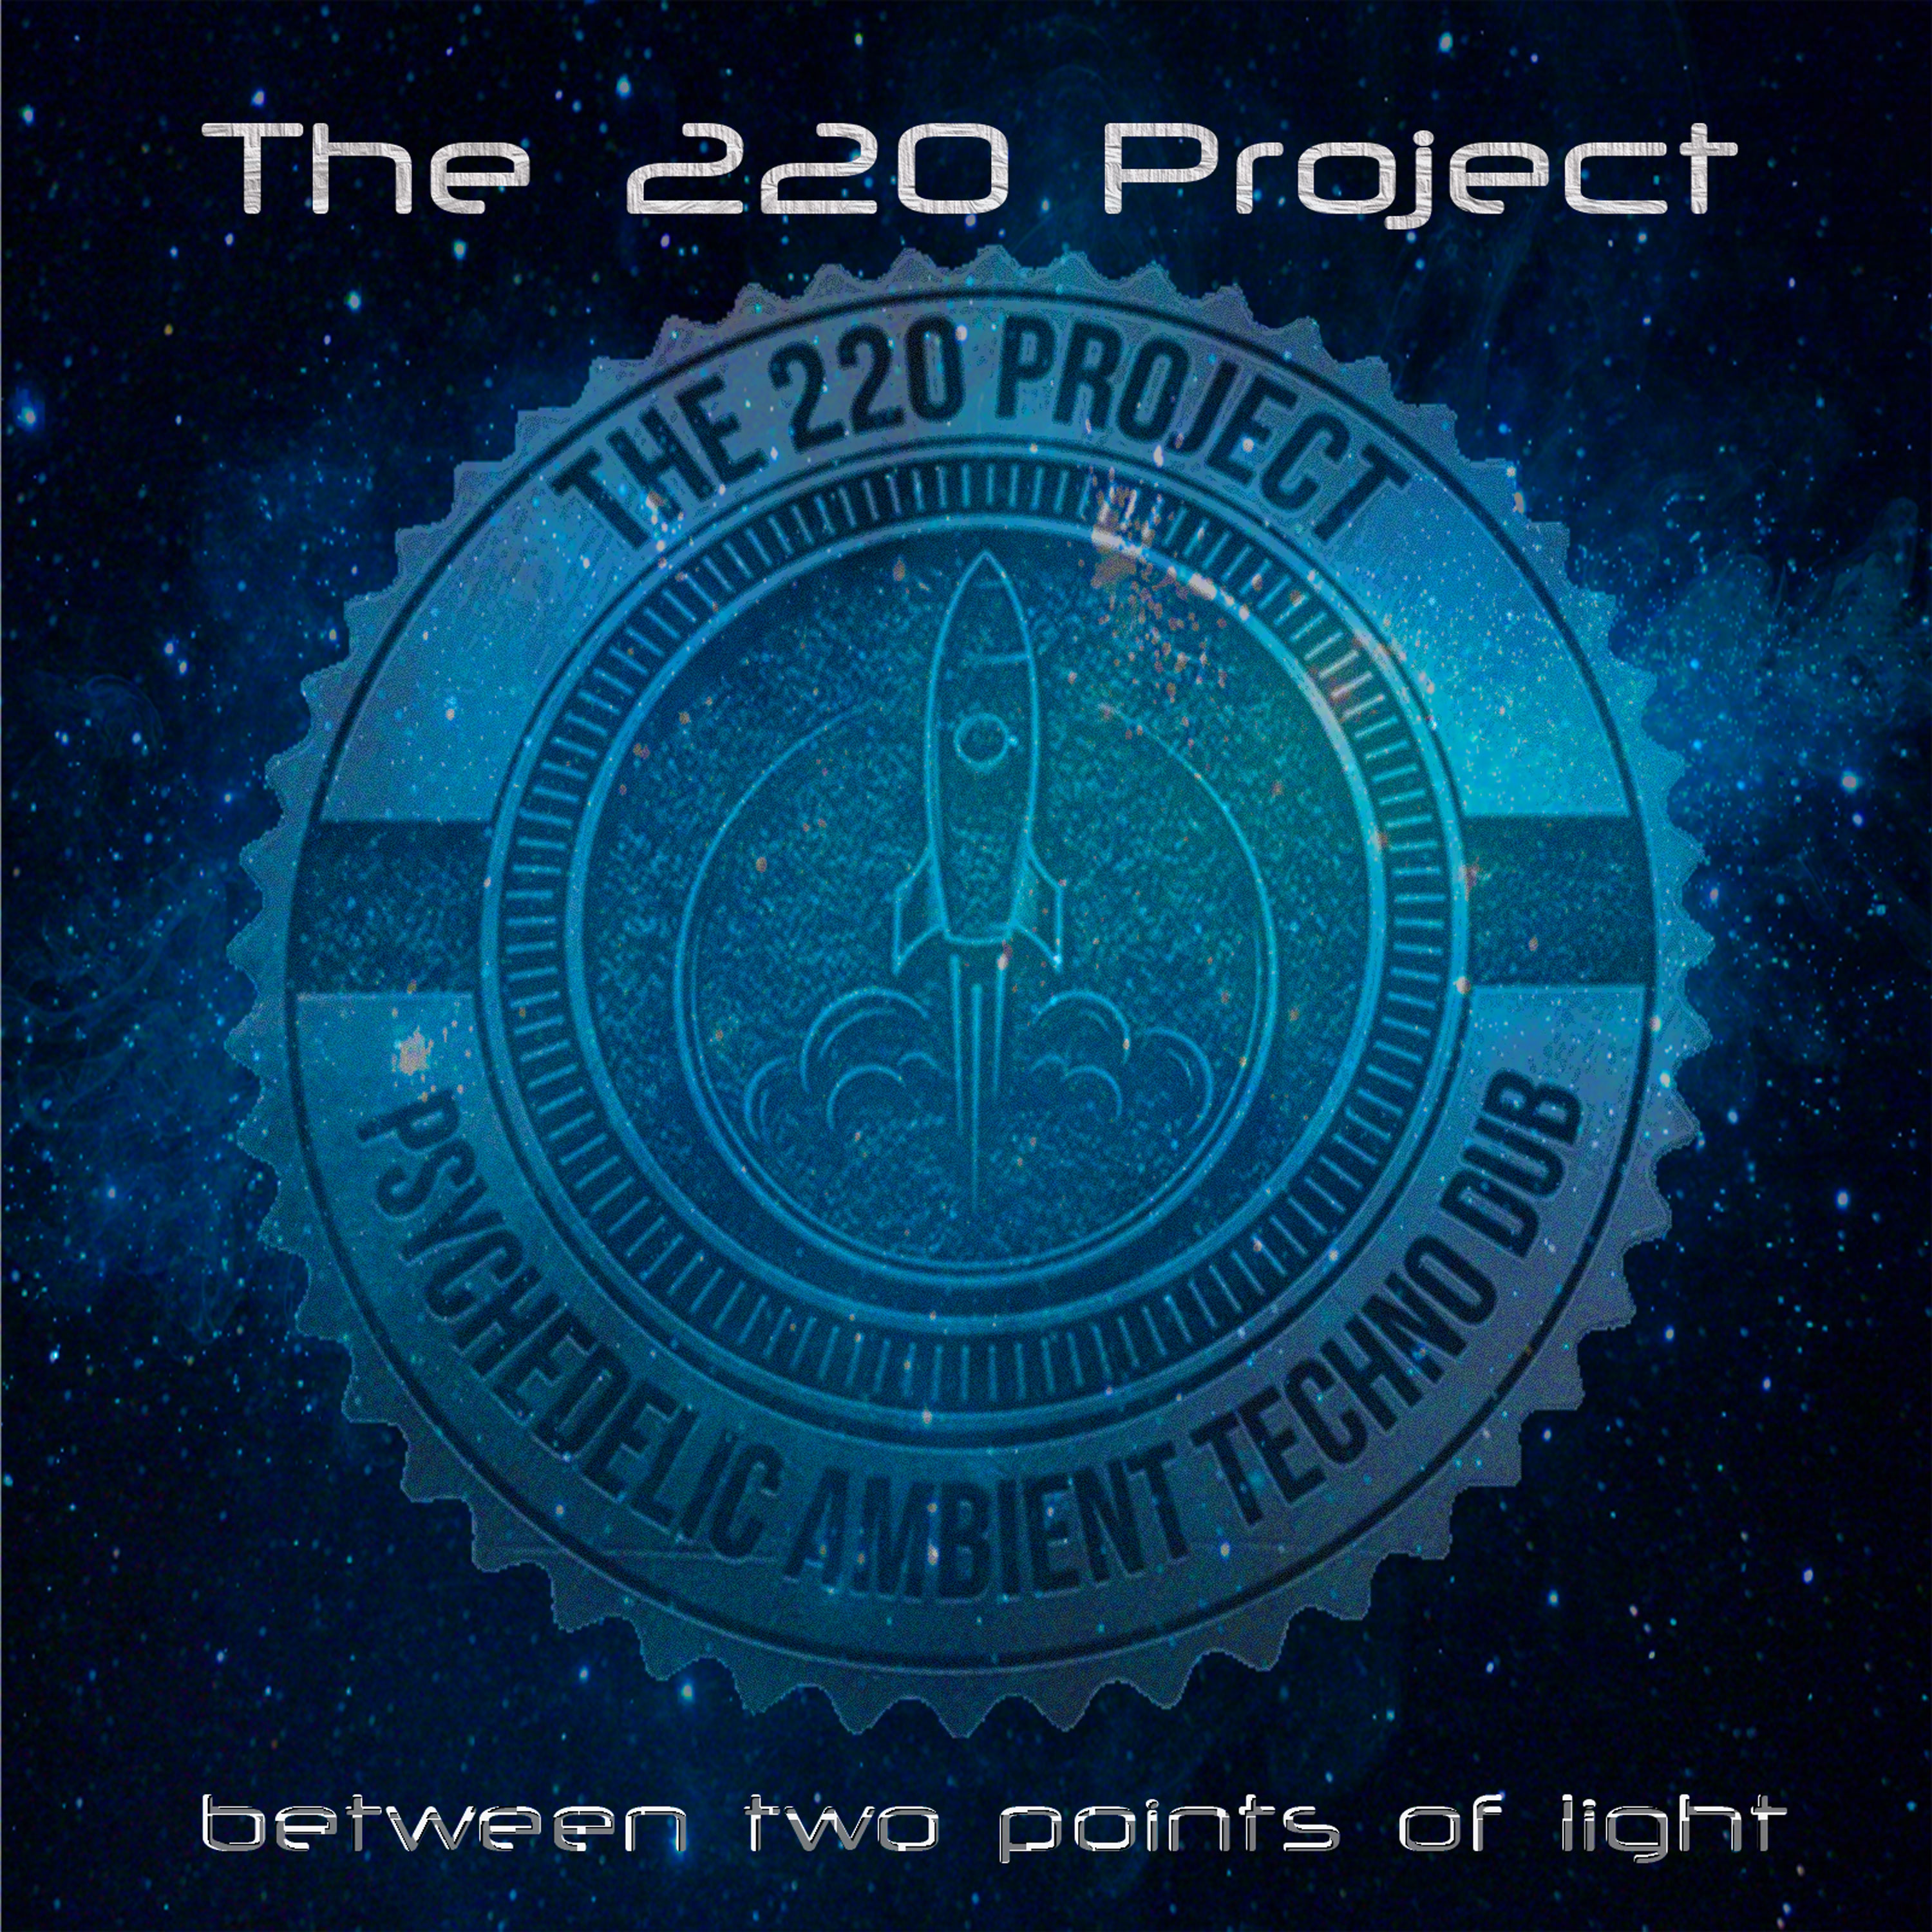 The 220 Project